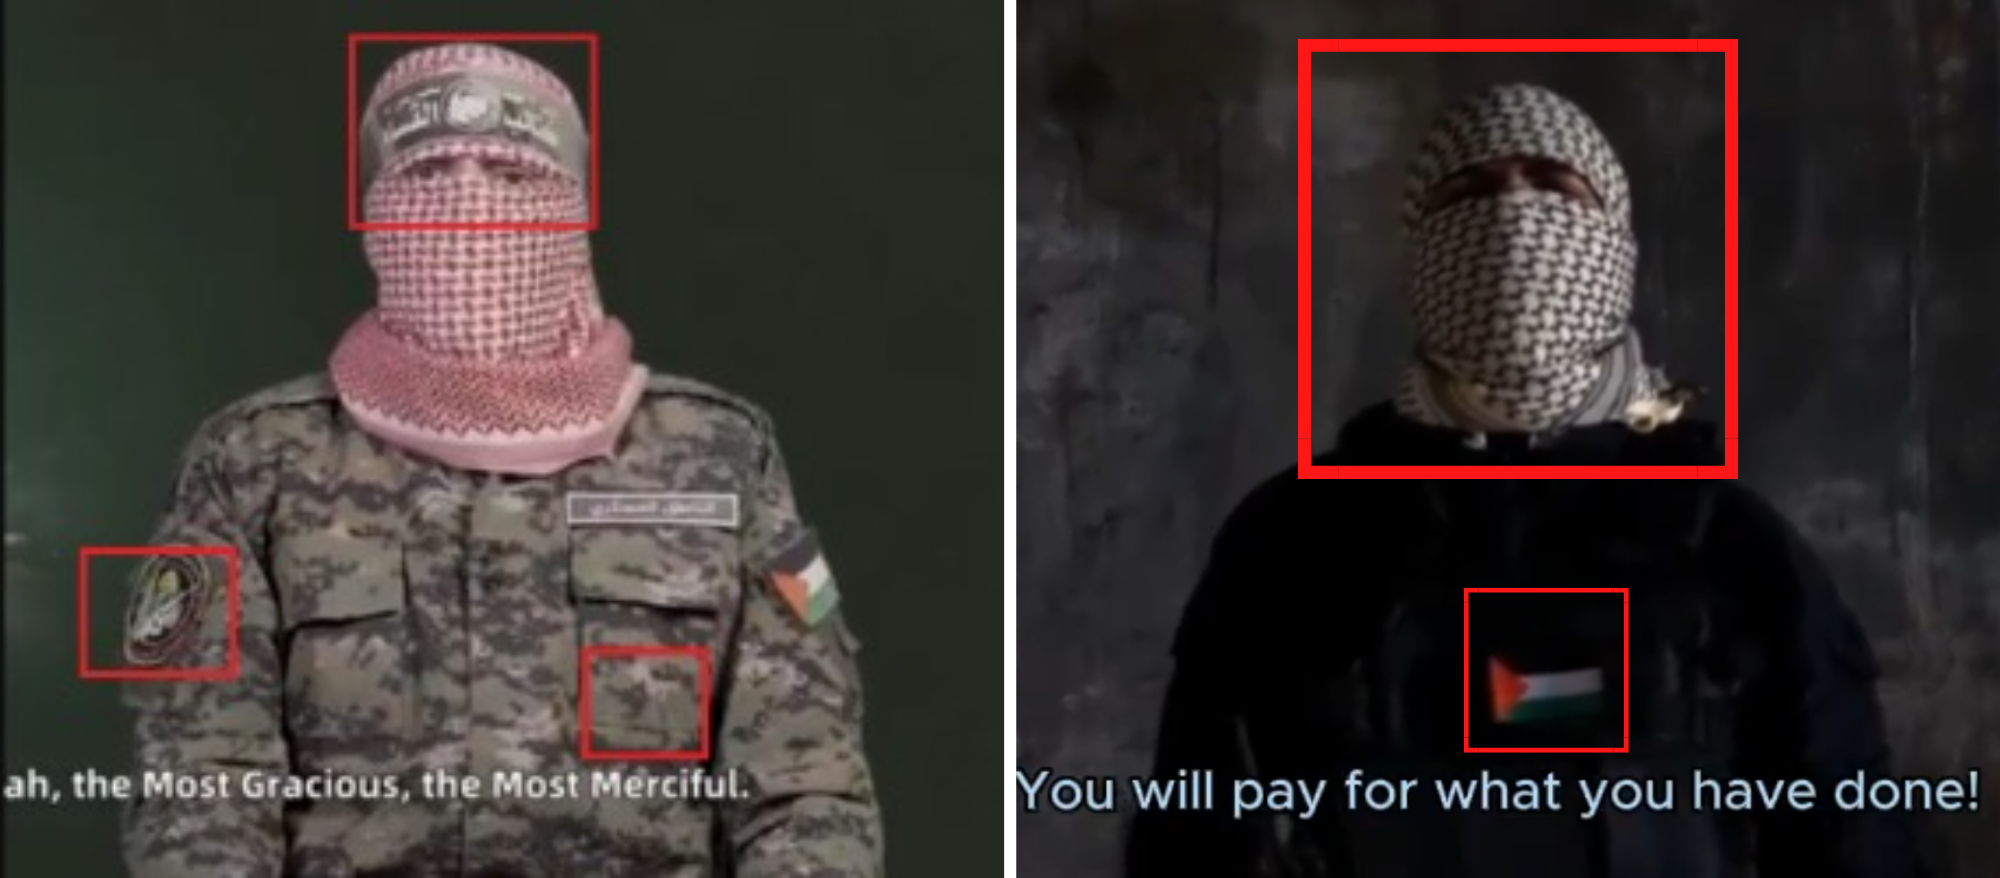 Comparison between an authentic Hamas video (left) and this manipulated video (right).